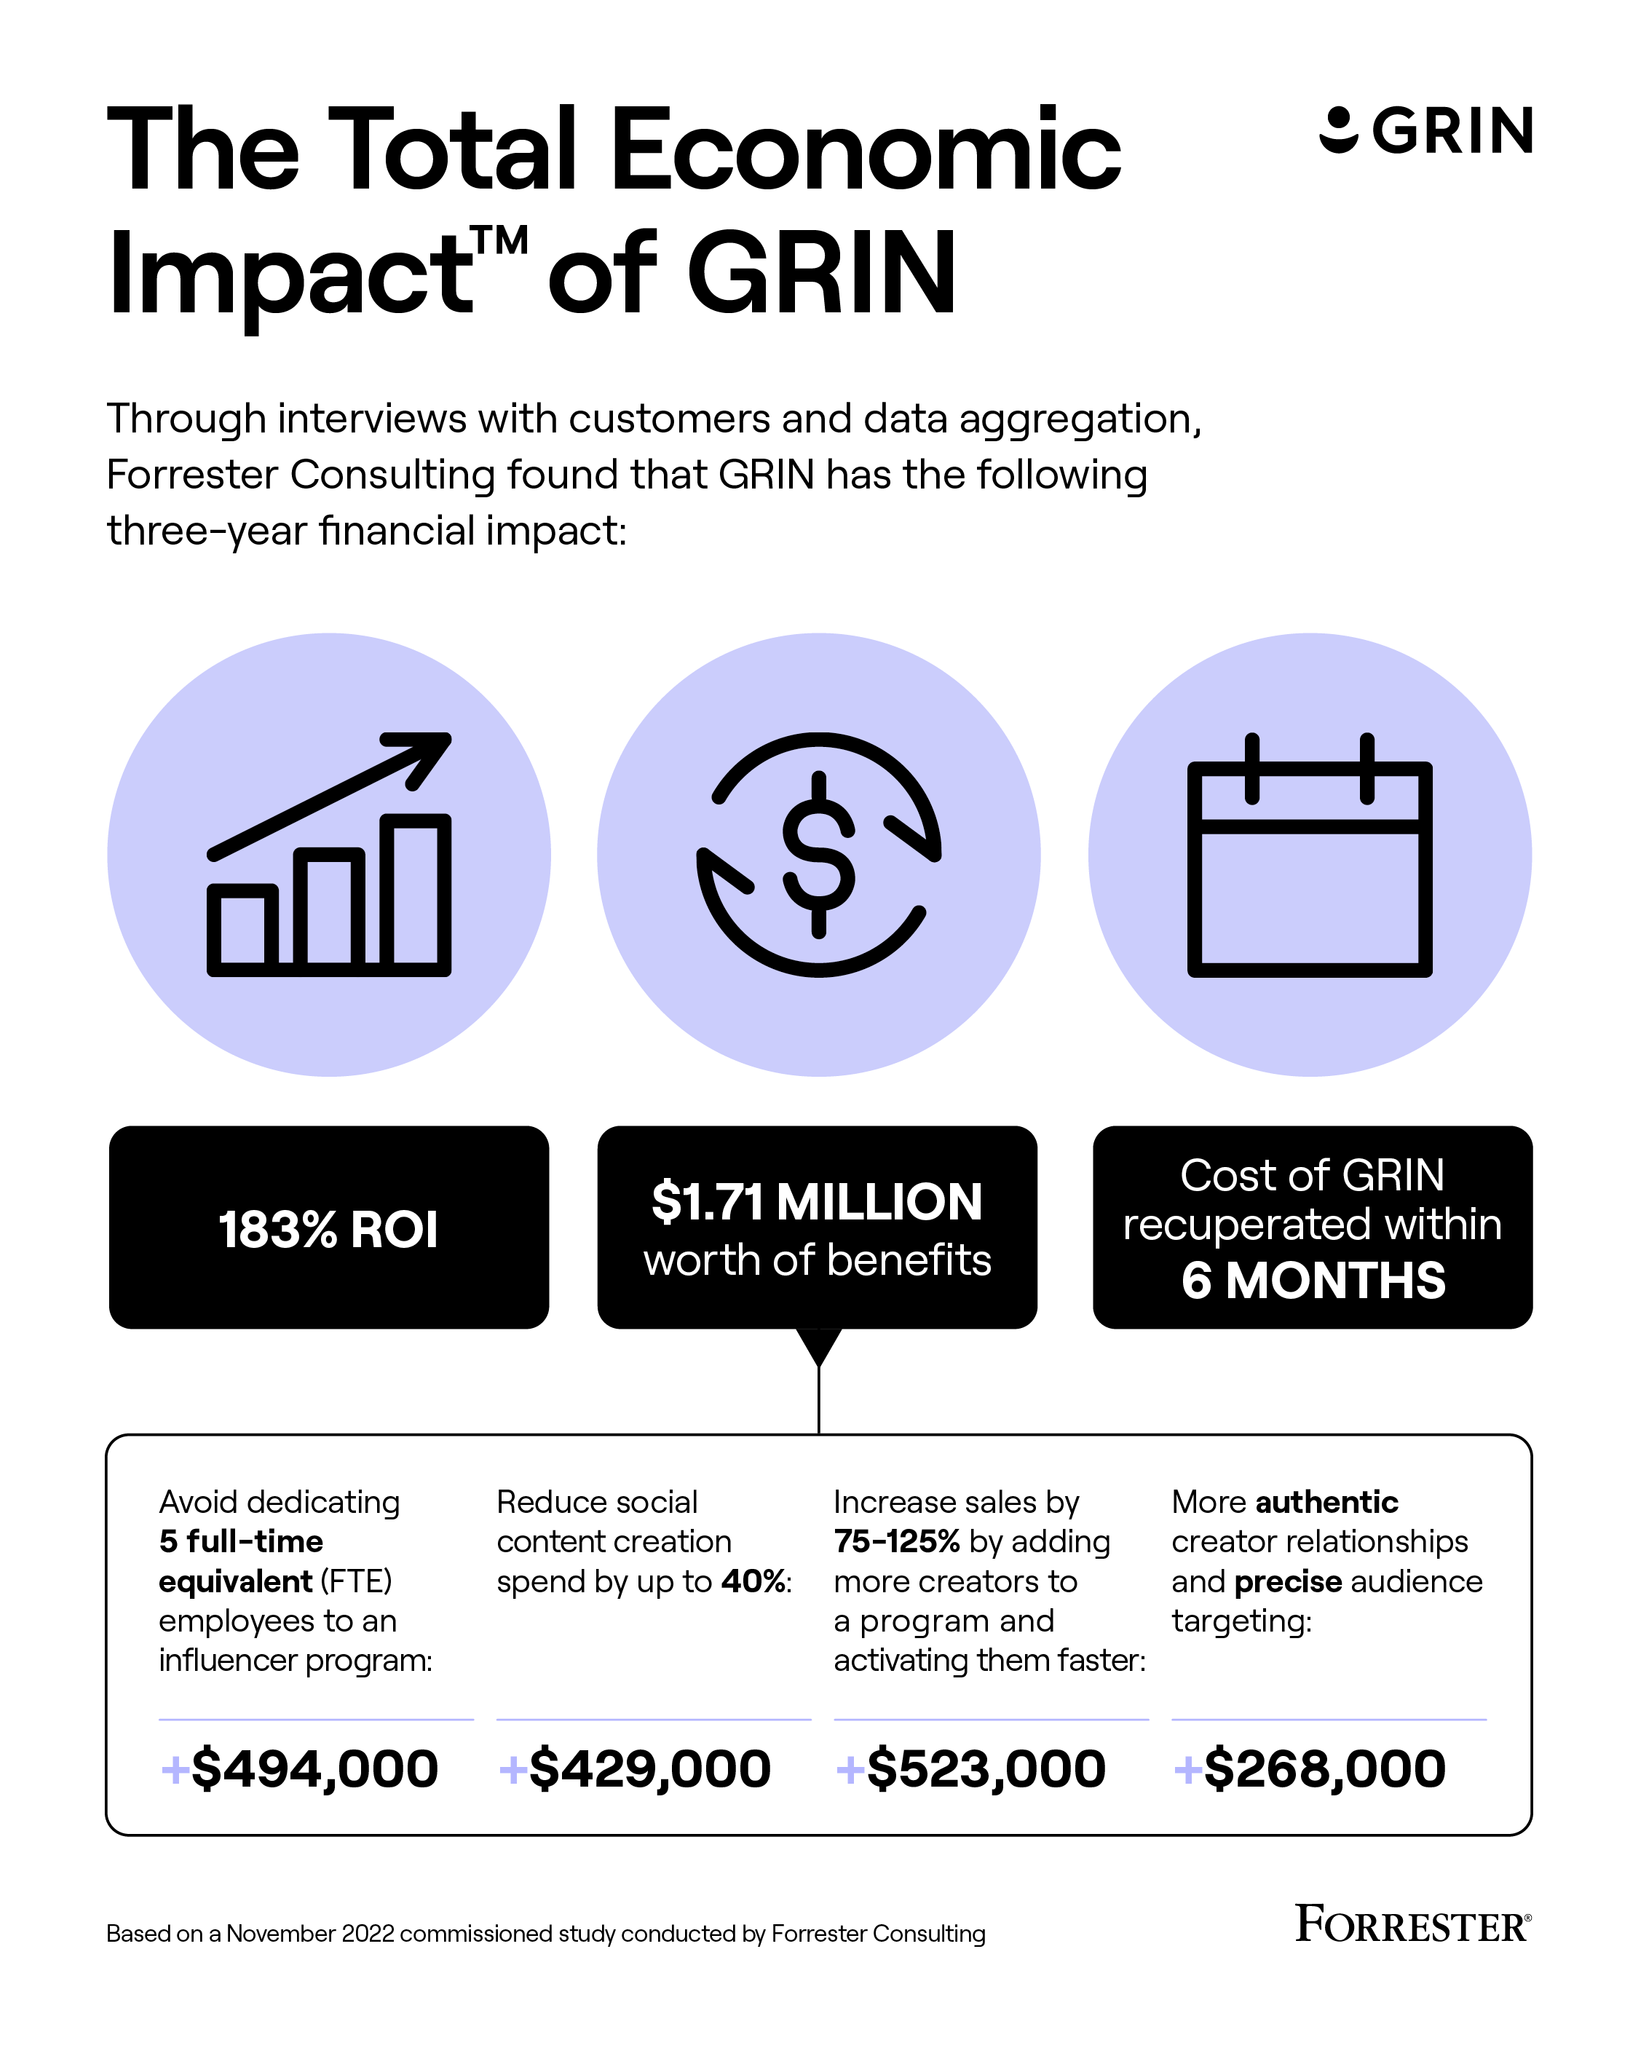 Page detailing some of The Total Economic Impact of GRIN